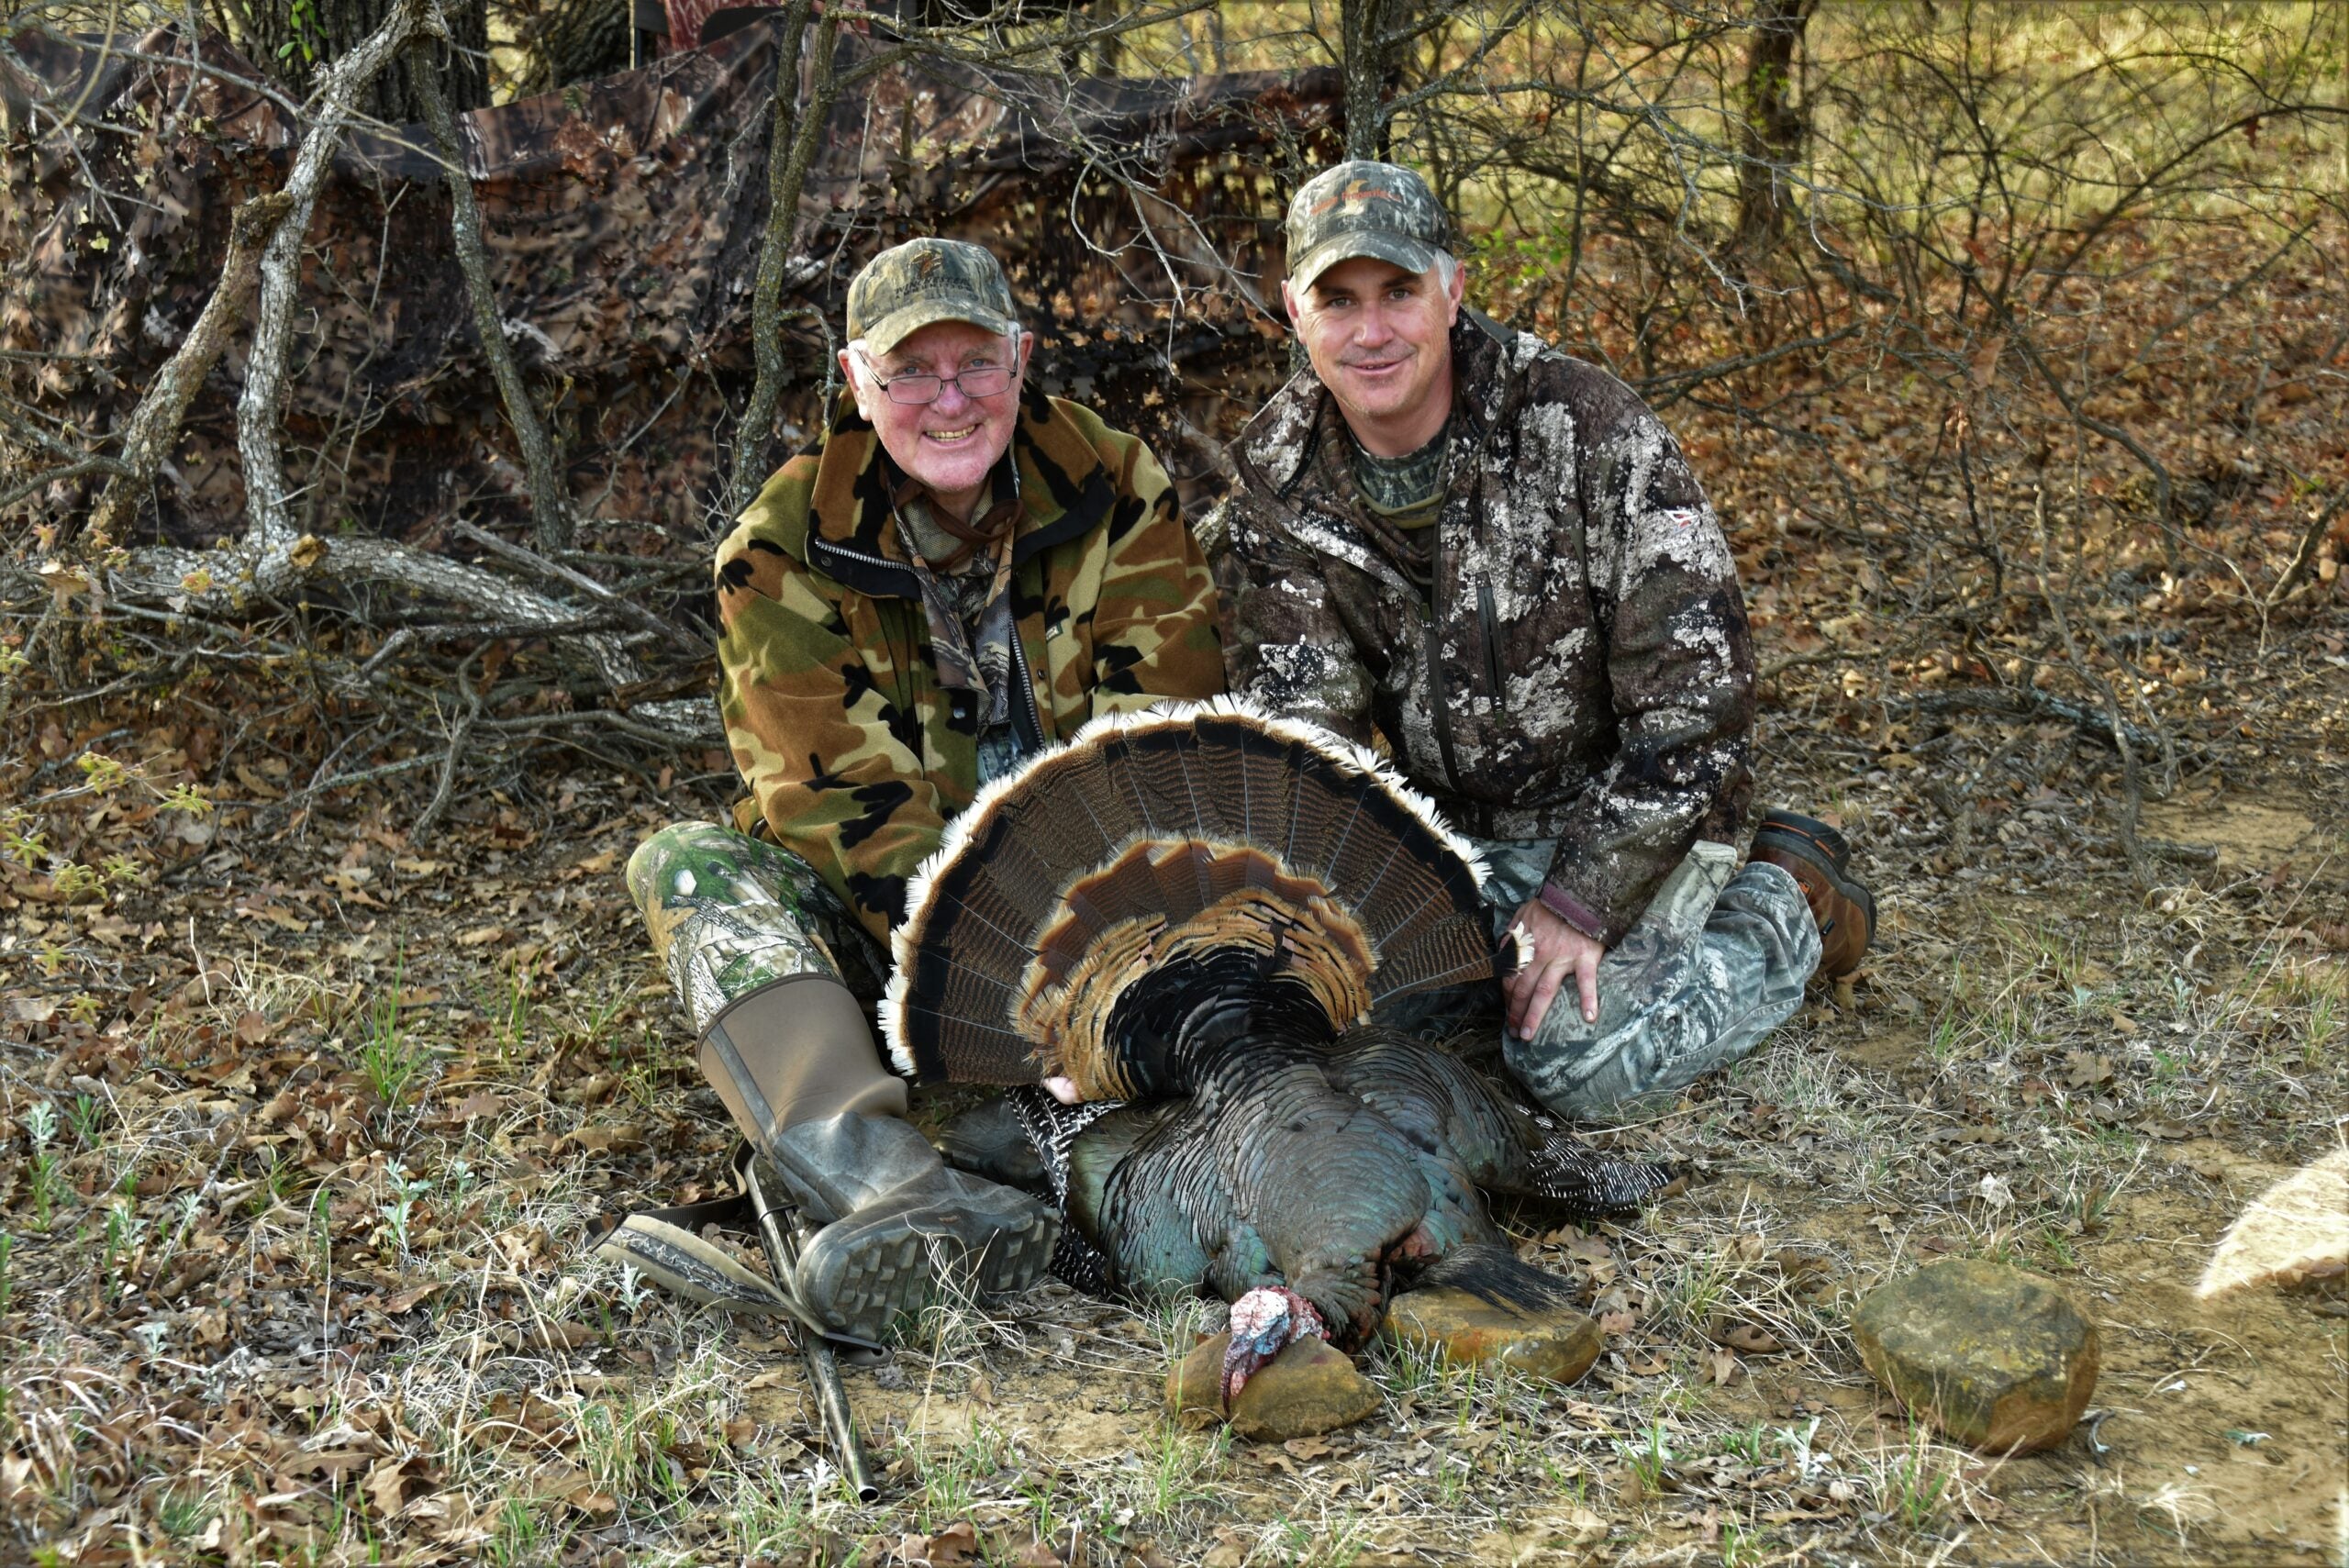 Two men dressed in camo sit on the ground showing off a harvested Rio Grande turkey